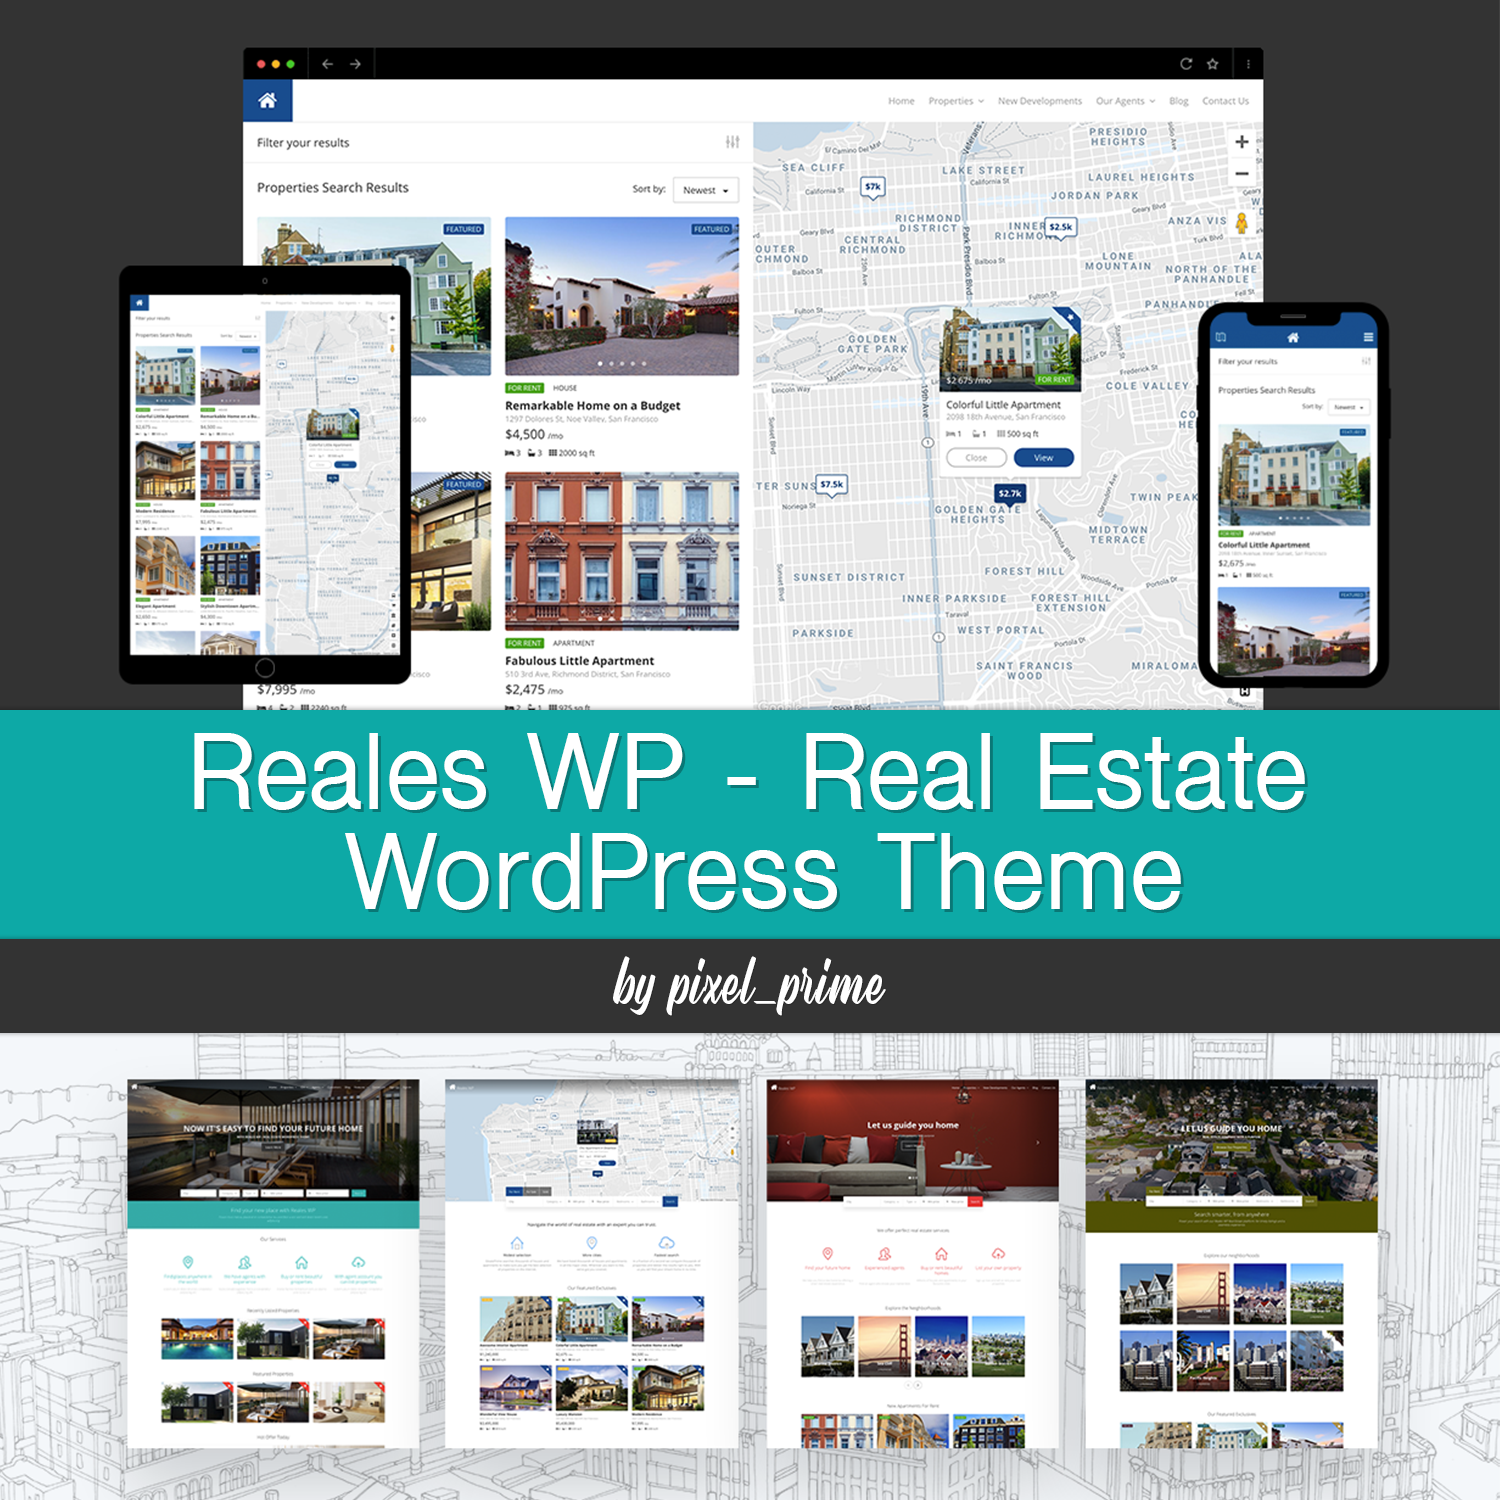 Images with reales wp real estate wordpress theme.